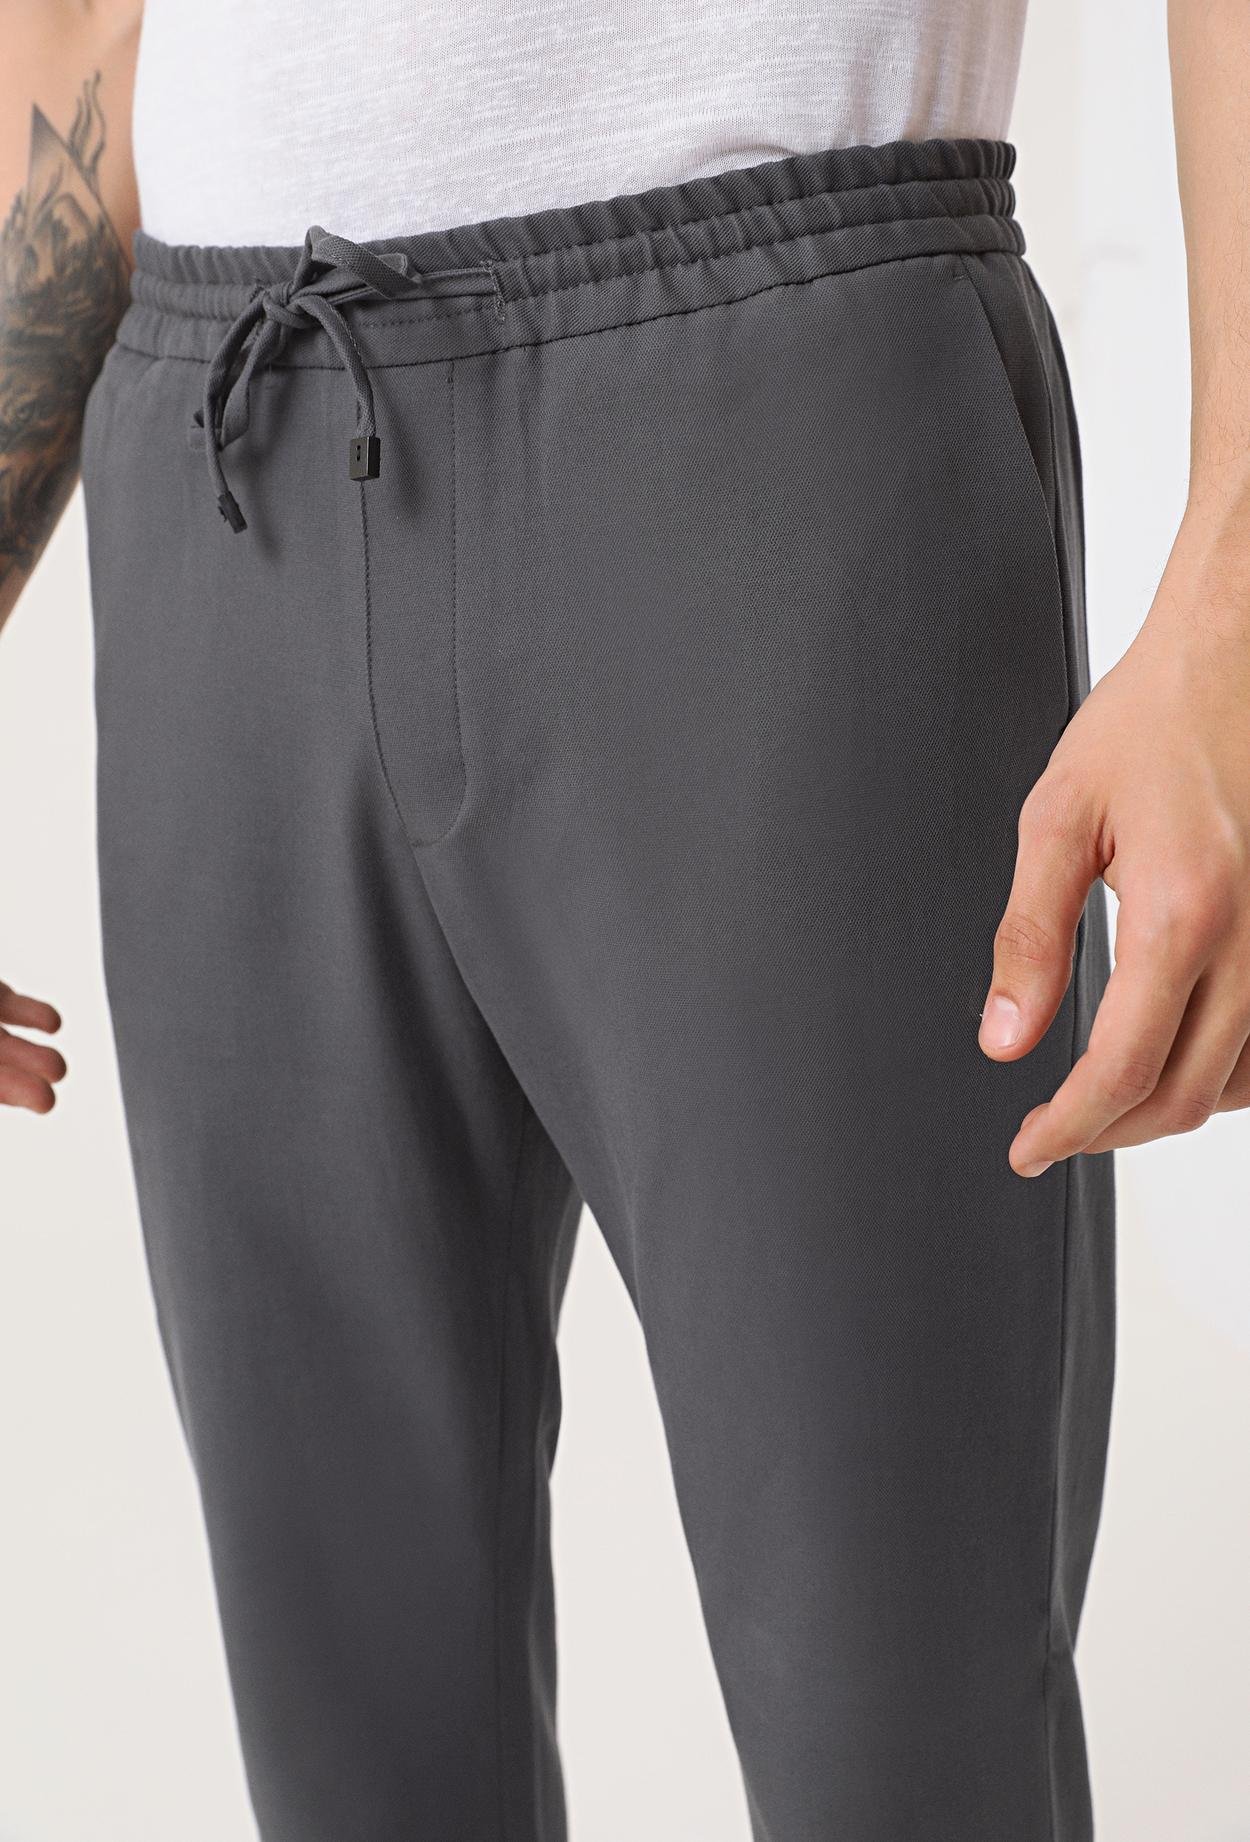 Twn Relaxed Fit Antrasit Jogger Pantolon